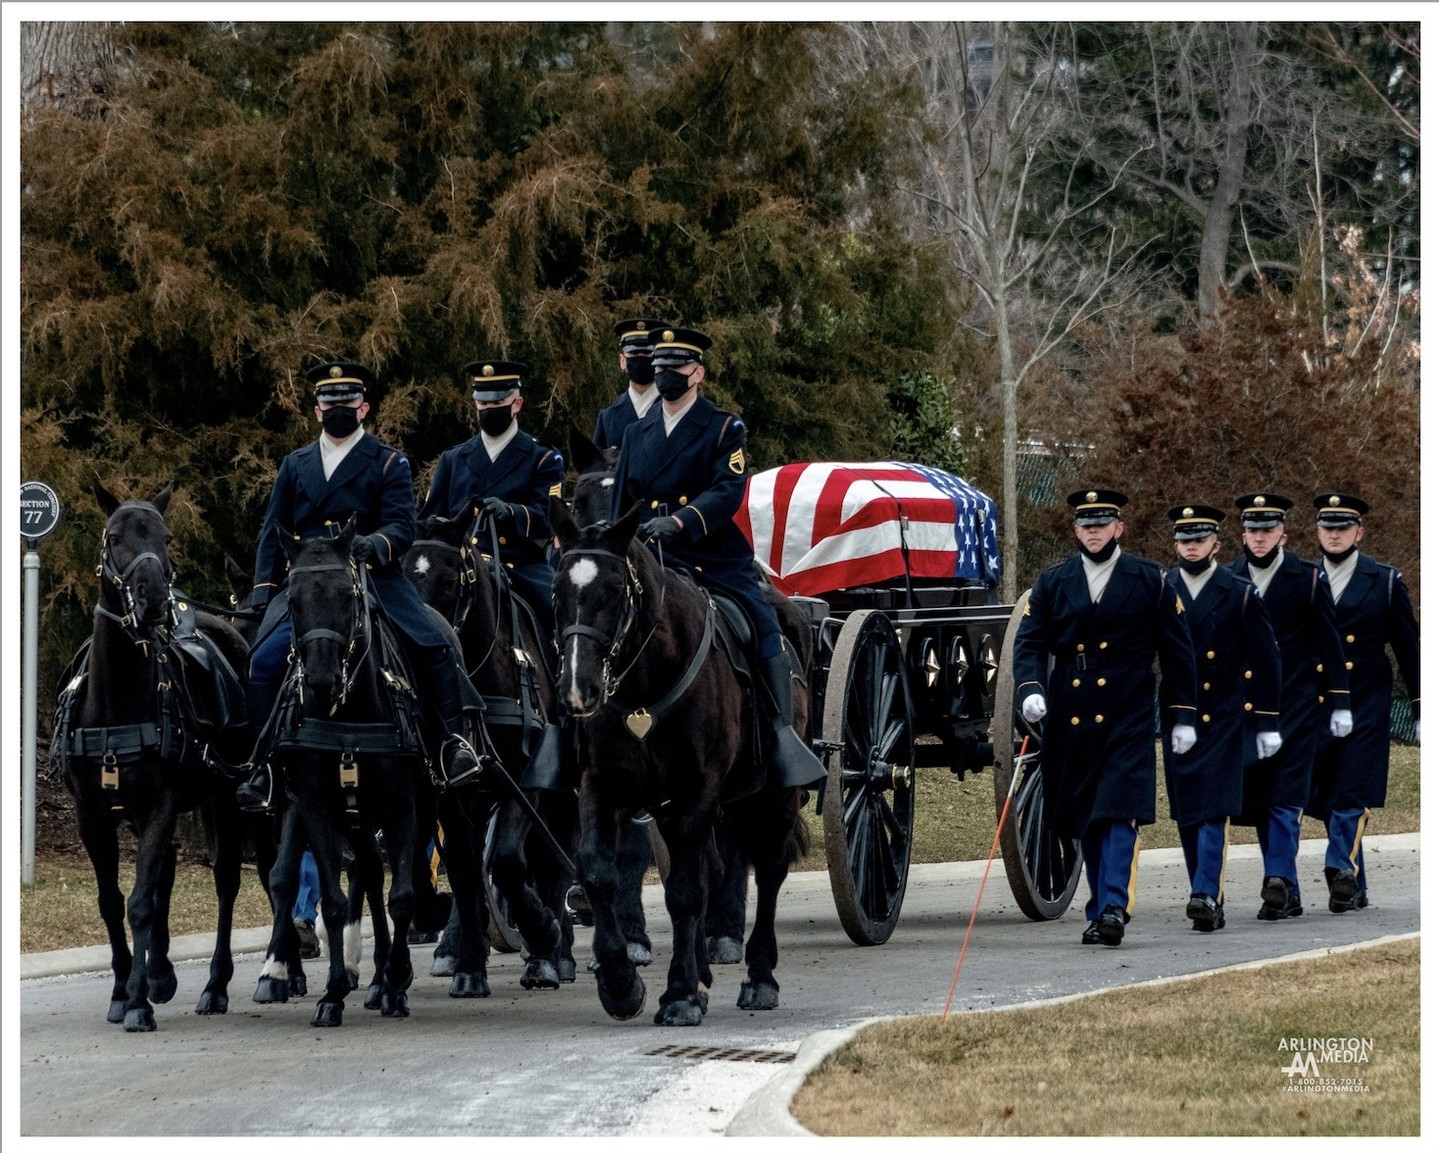 A US Army caisson team carries the remains of an honored veteran through the hallowed grounds of Arlington National Cemetery during a full honors funeral service  as captured by the @arlingtonmedia team.